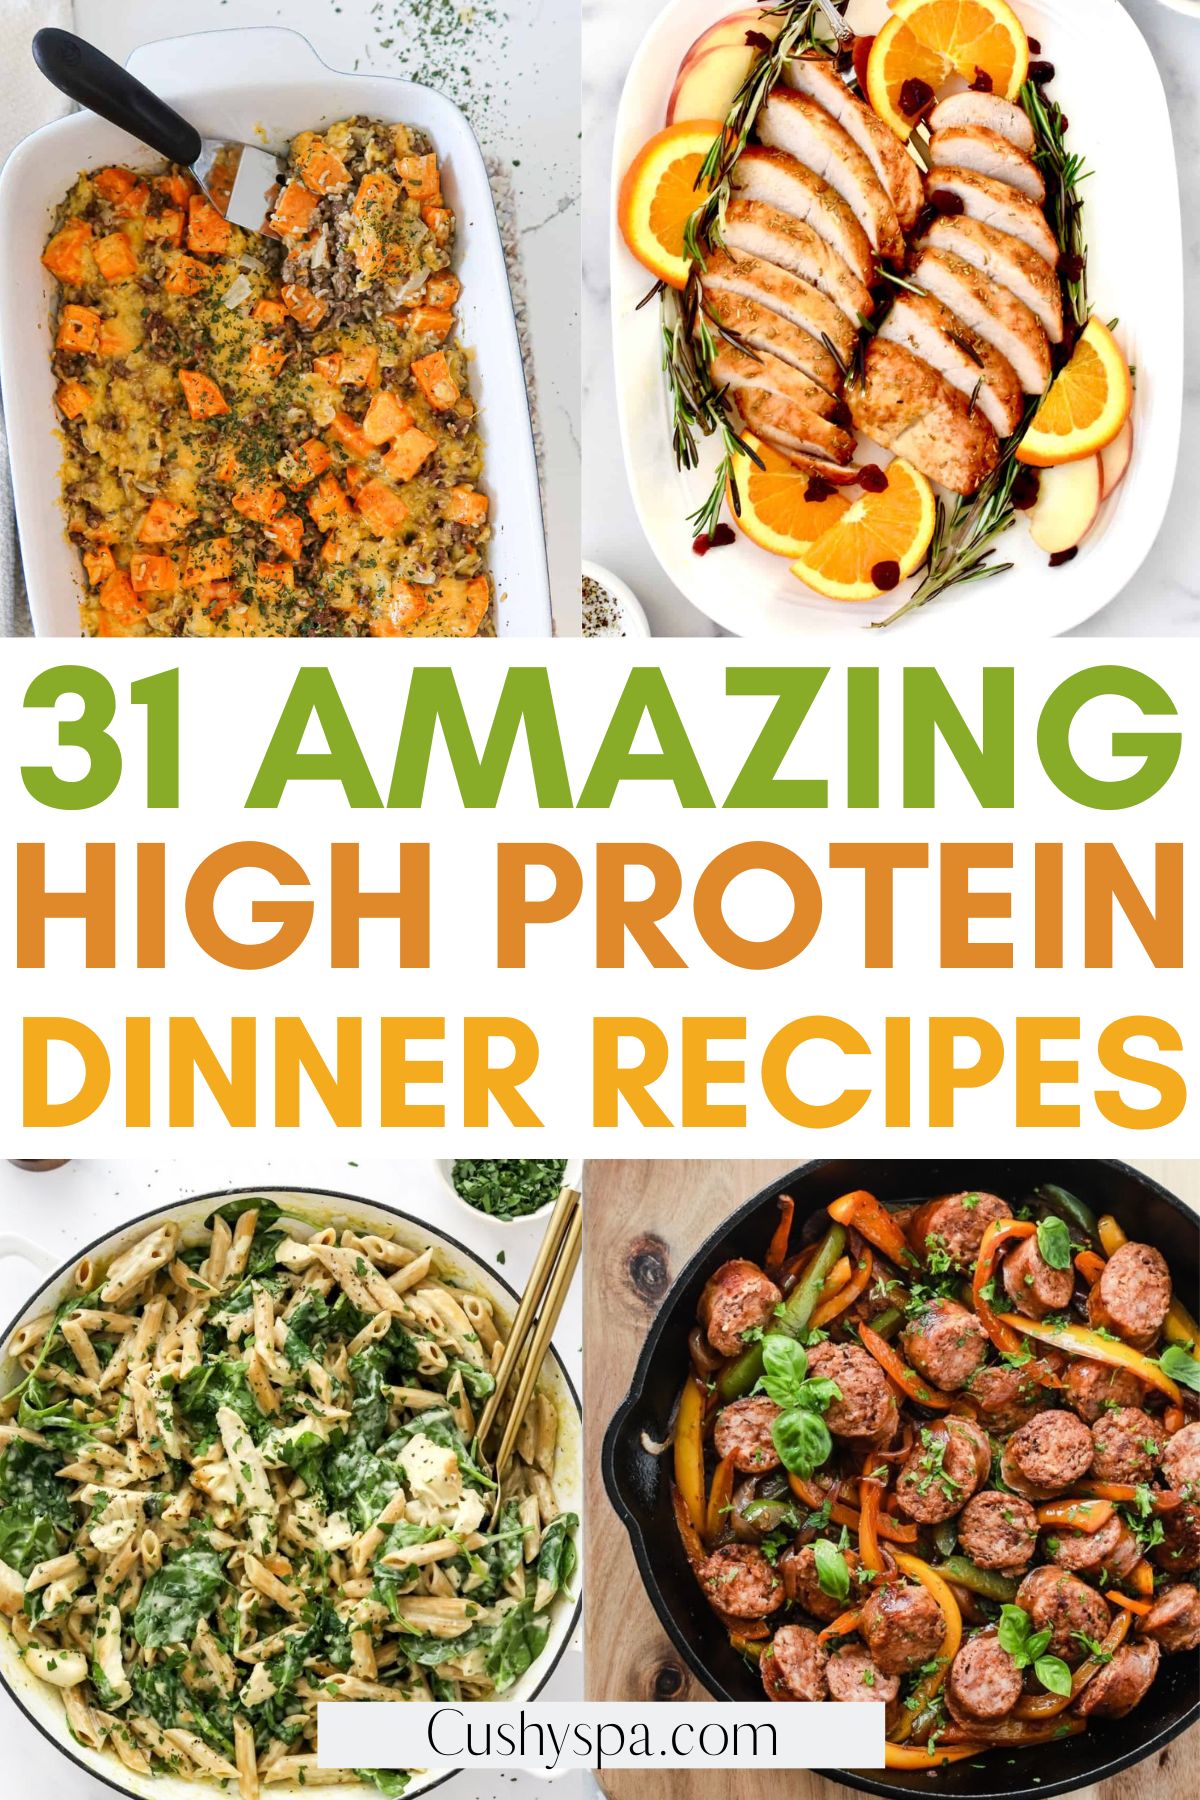 High protein dinner recipes